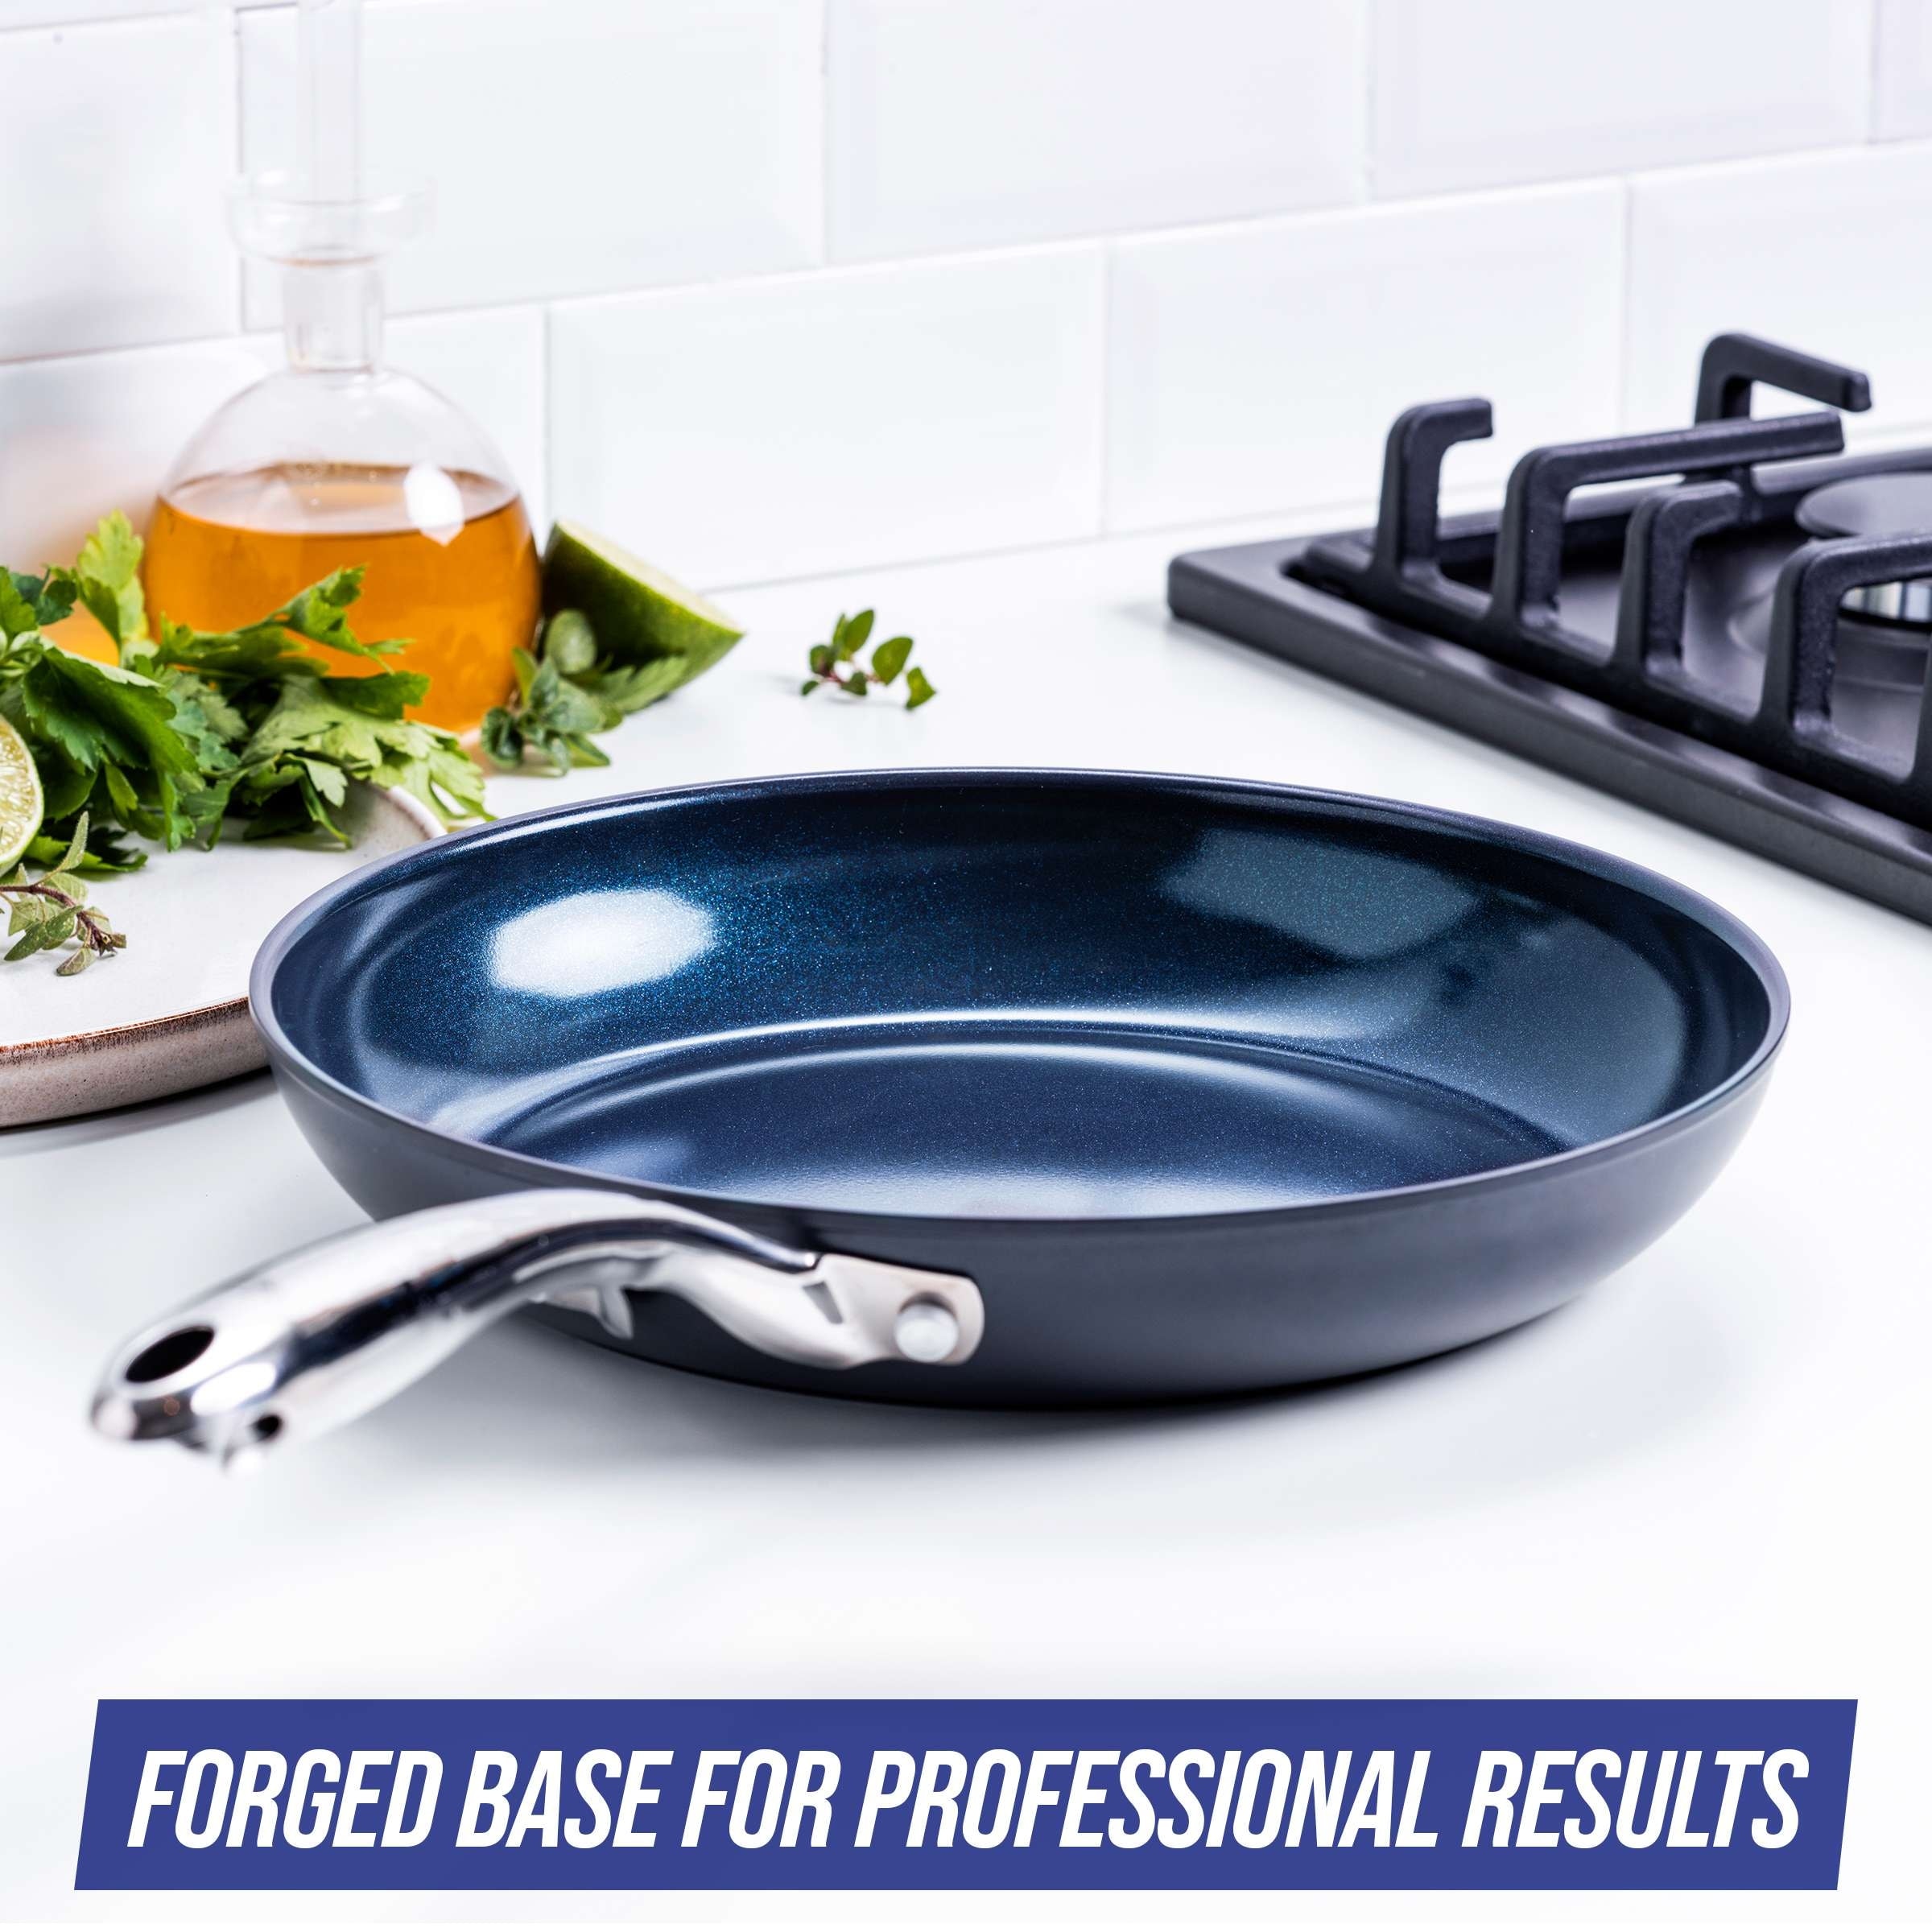 https://ak1.ostkcdn.com/images/products/is/images/direct/2ed22605bce584beddf2e5186a7c9a5c8bca0304/Blue-Diamond-Hard-Anodized-Toxin-Free-Ceramic-Nonstick-Cookware-Pots-and-Pans-Set%2C-10-Piece.jpg